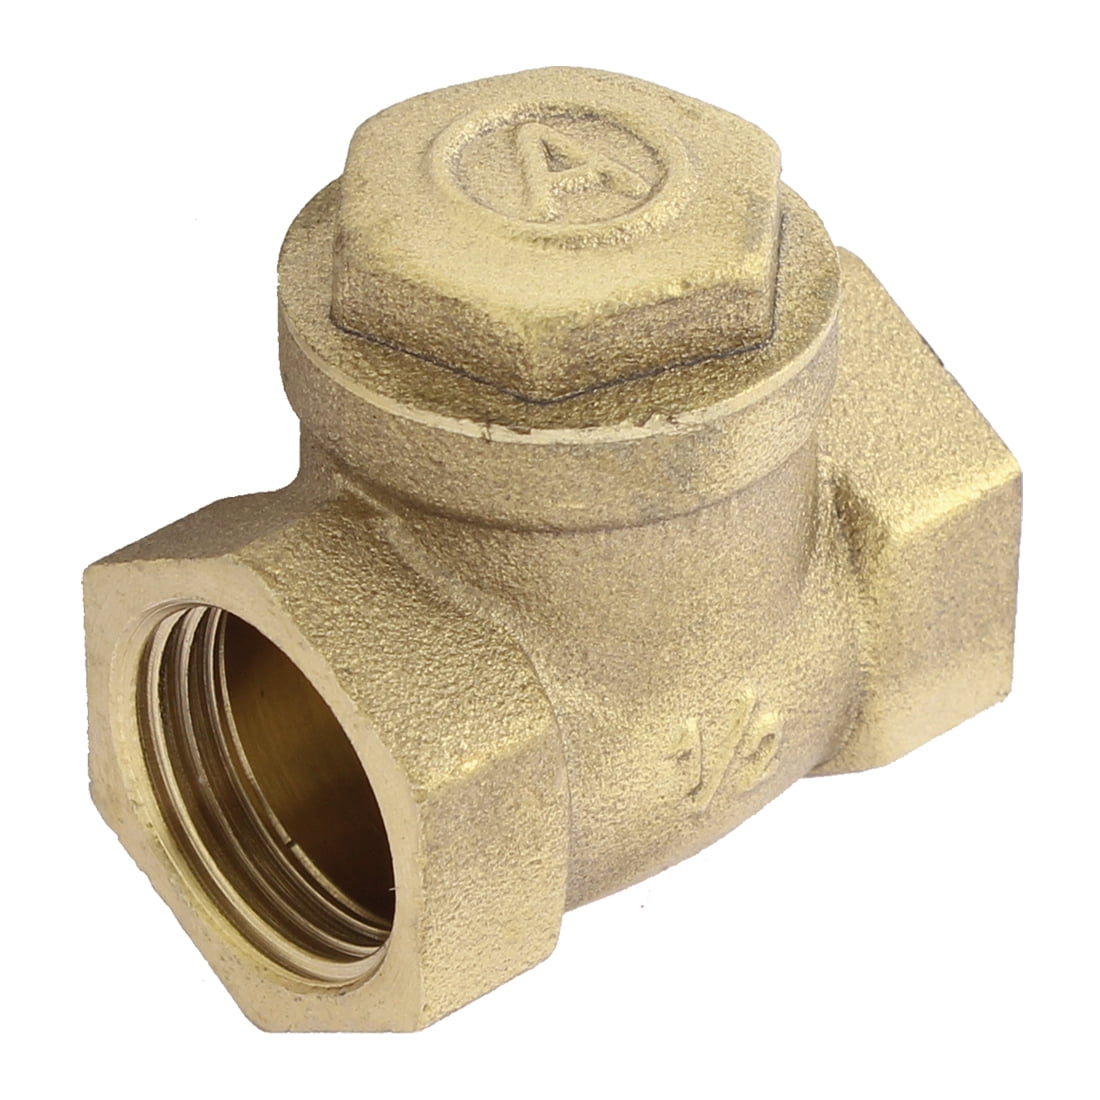 Details about   Plumbing Water Heater Check Valve 1/2BSP Female Thread 